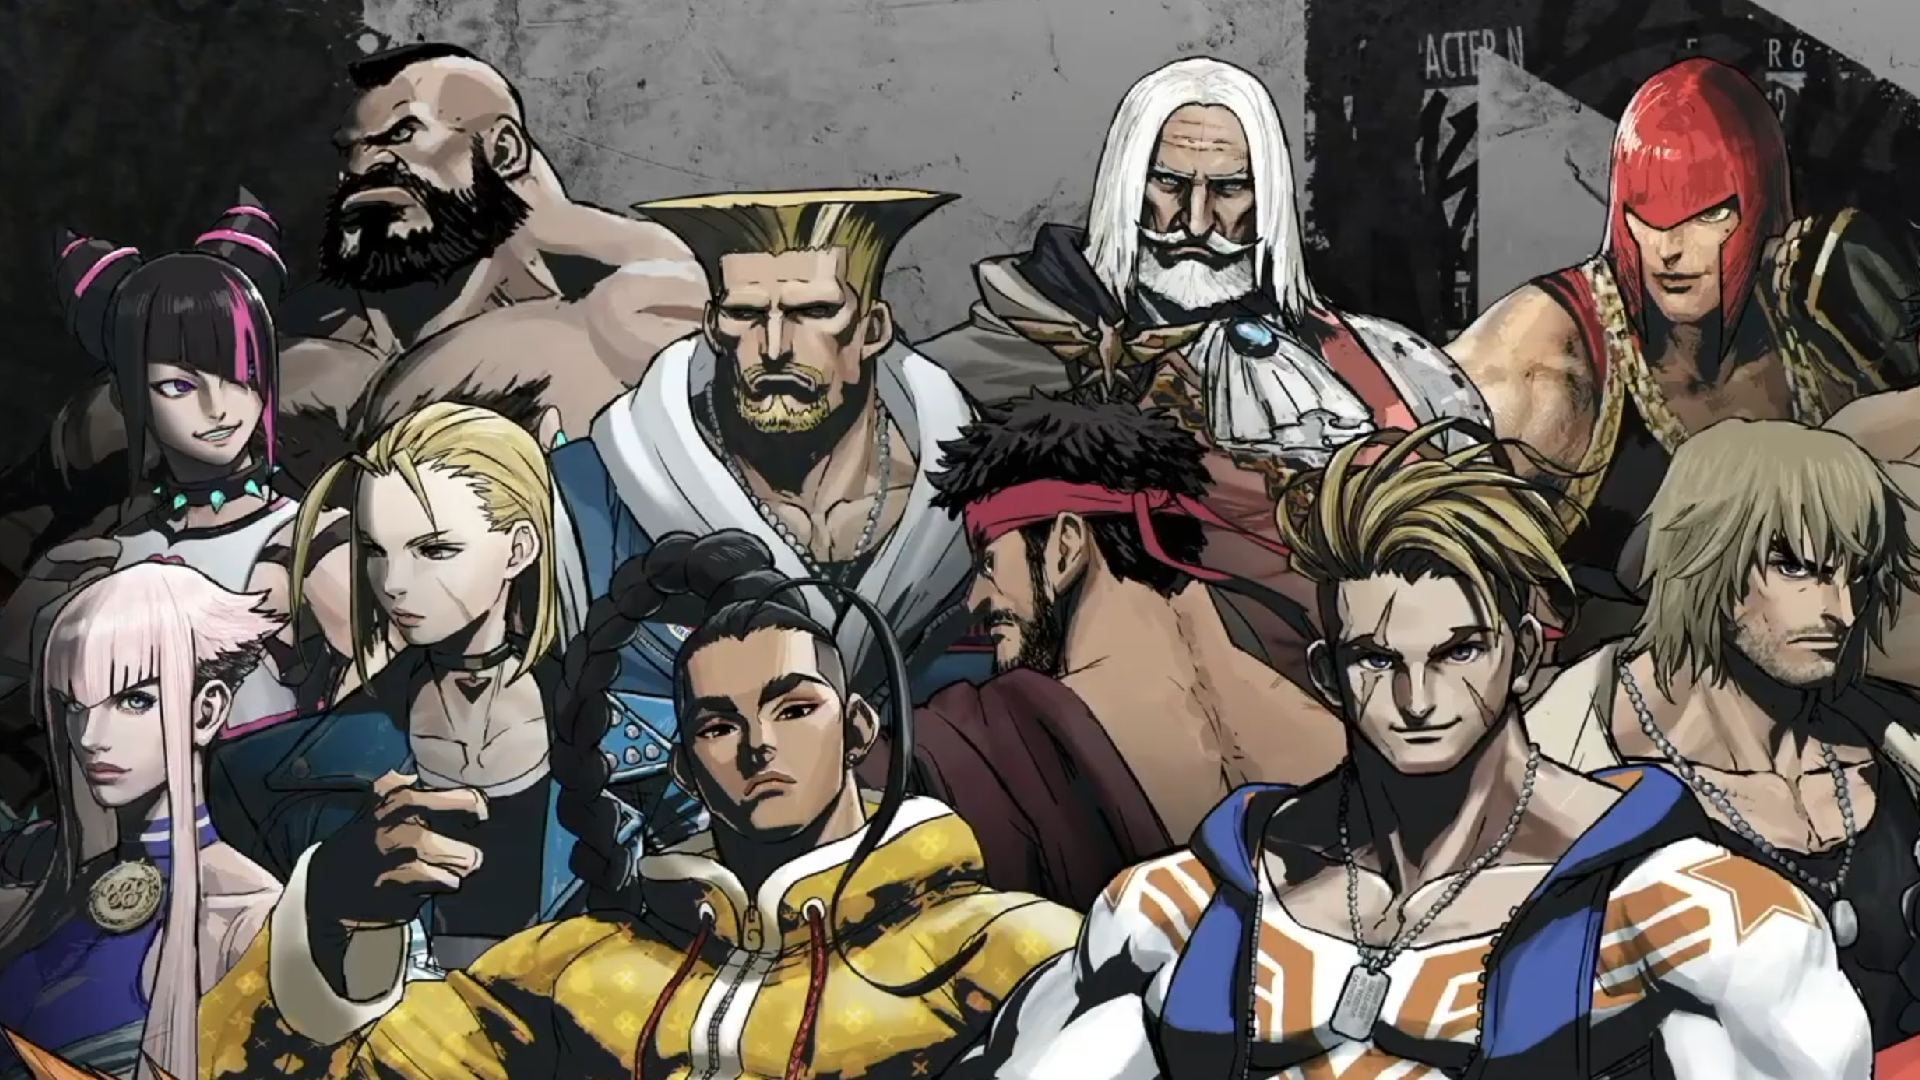 New Street Fighter 6 Announcements: Character Lineup Revealed